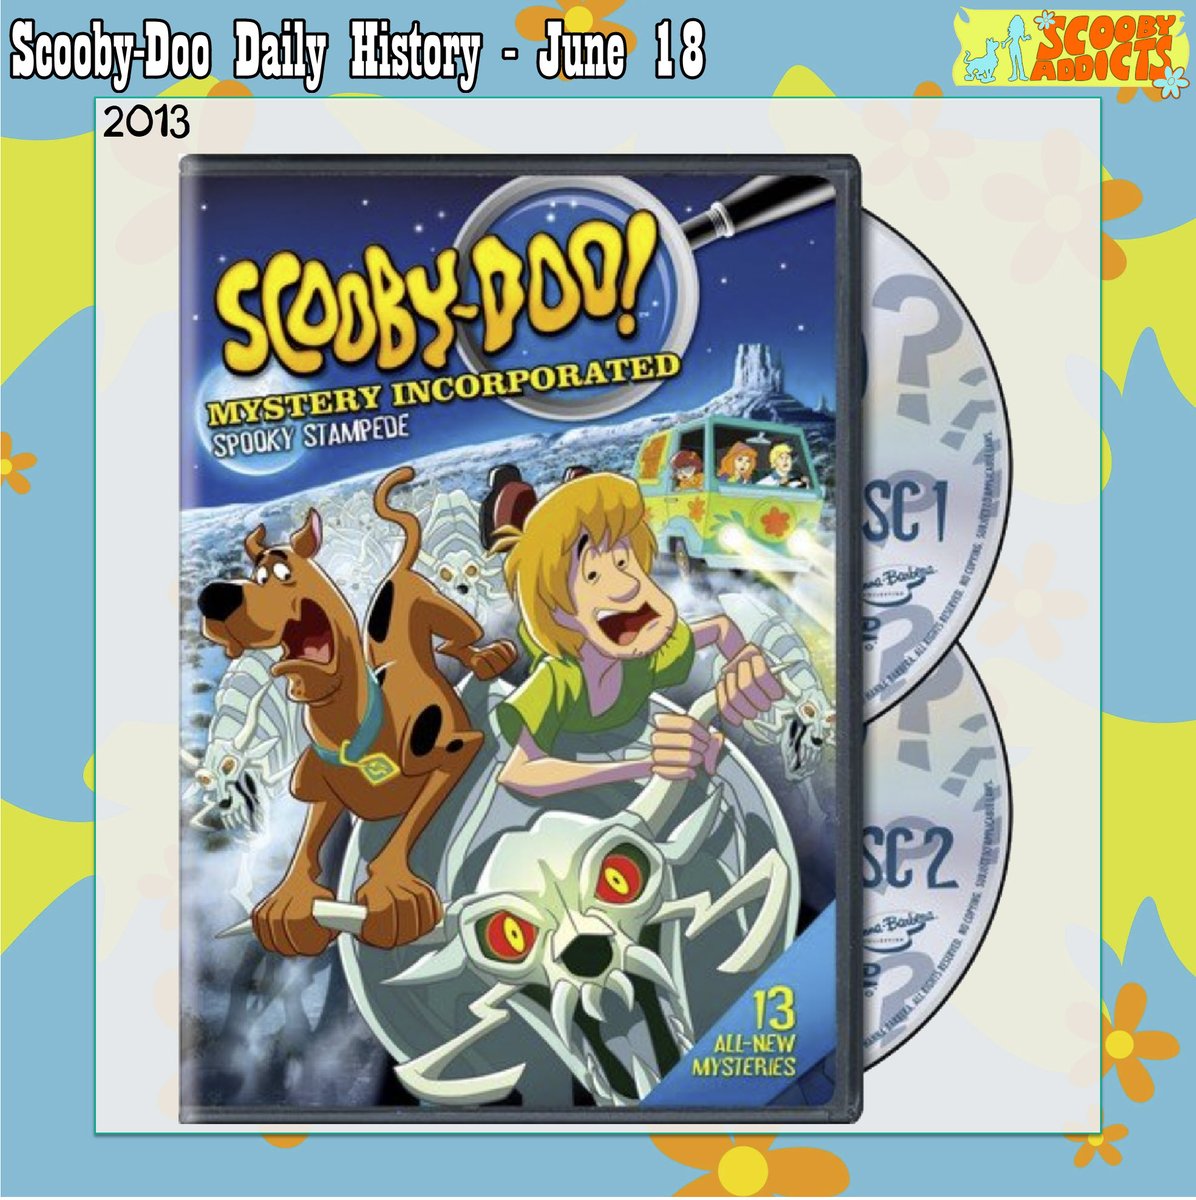 June 18 - #scoobydoohistory 

2013 - Scooby-Doo Mystery Incorporated Spooky Stampede DVD

#ScoobyDoo

scoobyaddicts.com